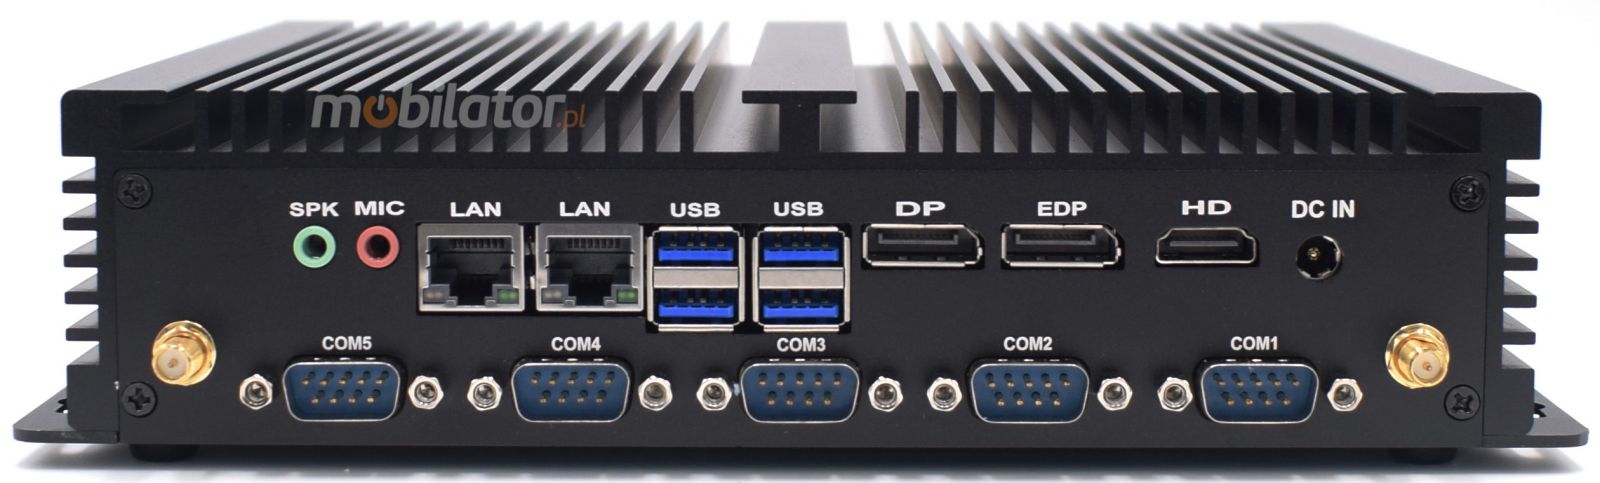 HyBOX H4 Intel i5  industrial mini computer with connectors: 